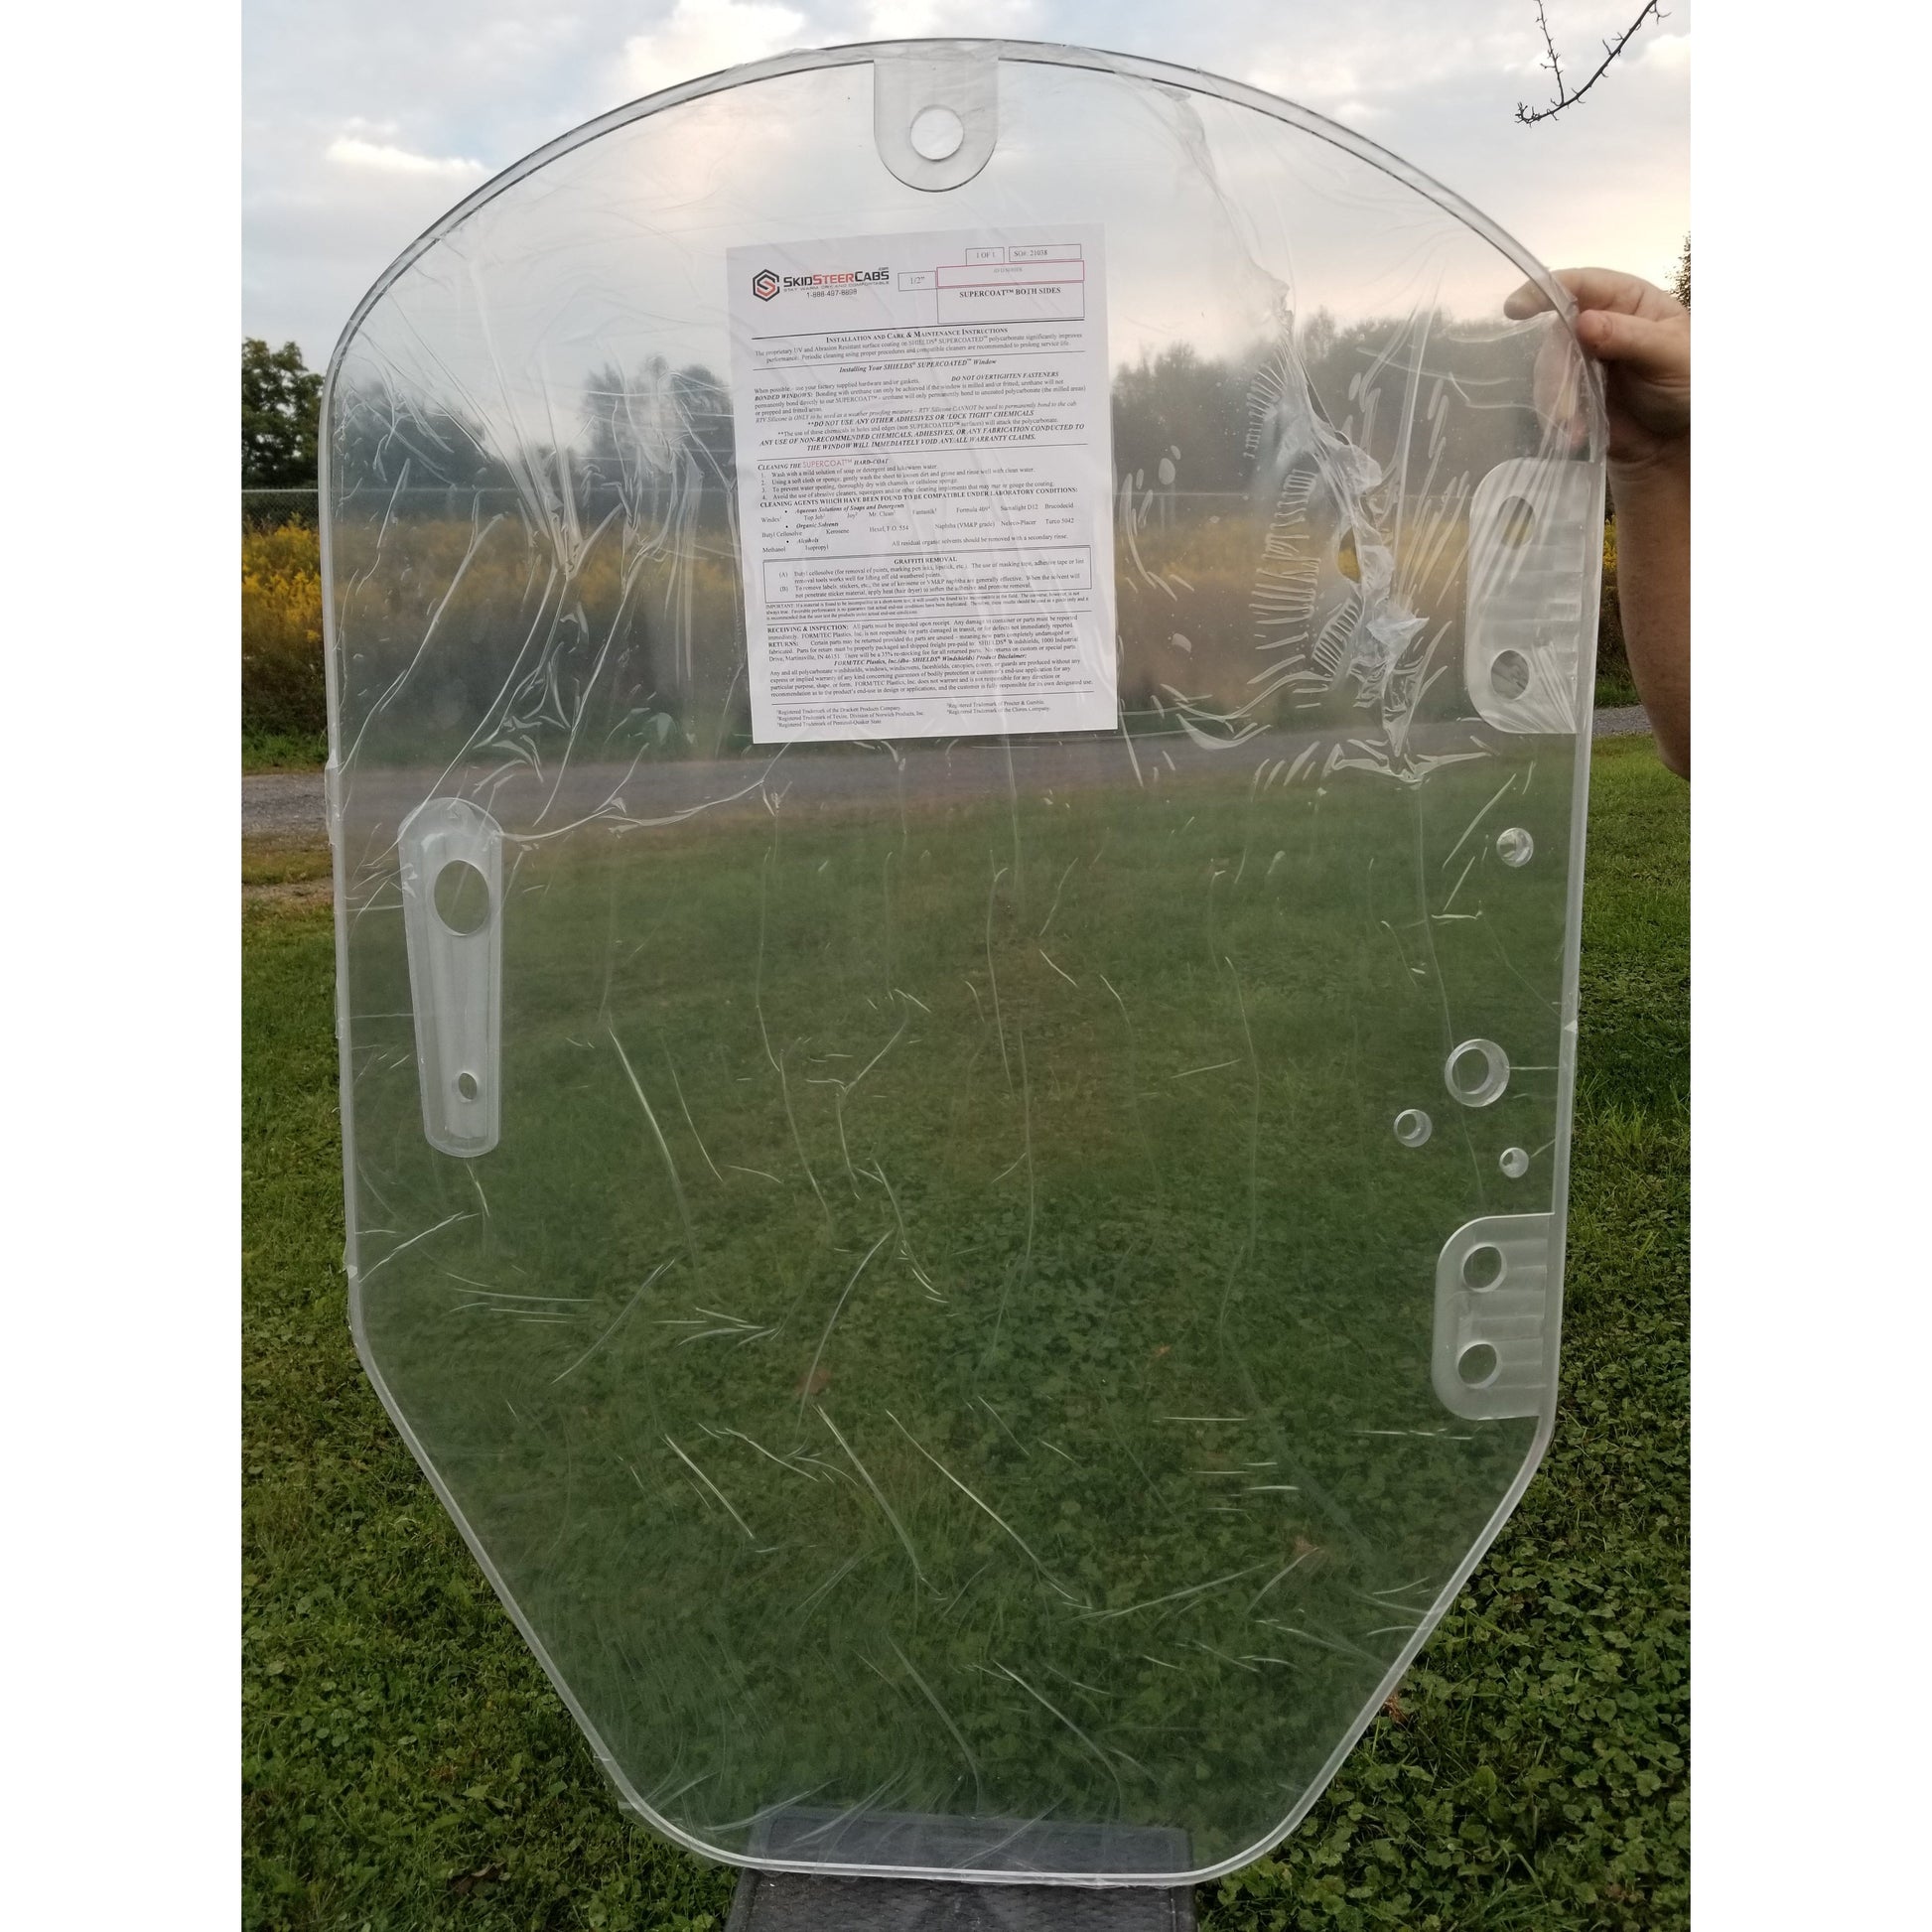 JCB POLYCARBONATE SKID STEER WINDSHIELD | REPLACEMENT | #400/E8640 | #332/x5157 |#402/P5831